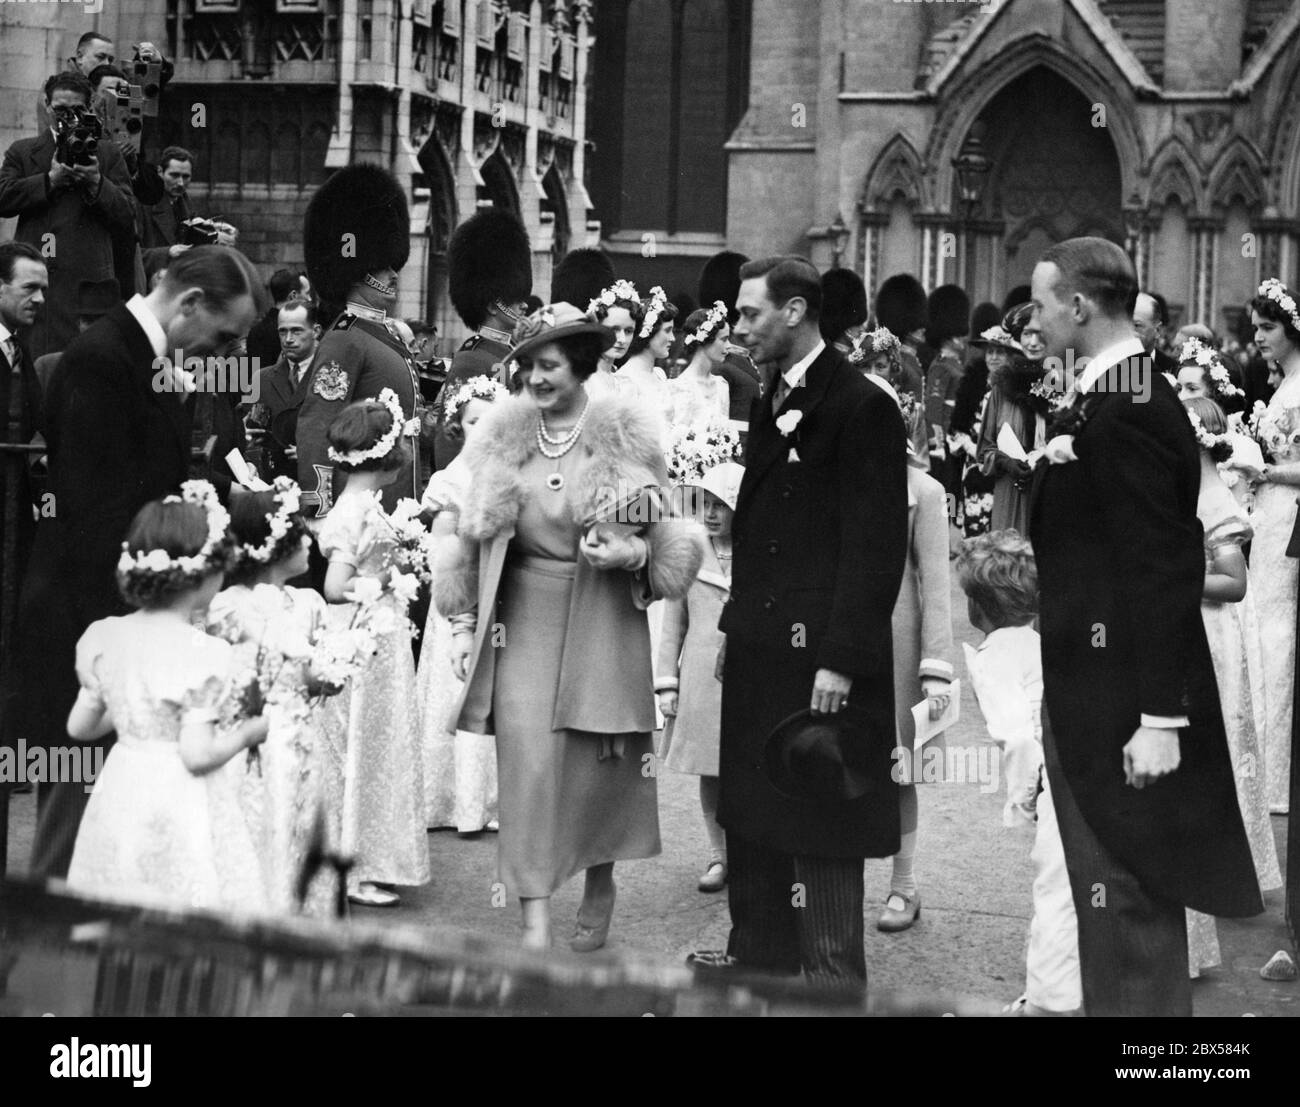 Queen Elizabeth, King George VI, Princess Margaret Rose and Princess Elizabeth (undercover) at the wedding of the Queen's niece, Miss Bowes-Lyon and Lieutenant-Colonel Thomas William Arnold Anson at Westminster Abbey. The bridesmaids are standing at the edge. Stock Photo